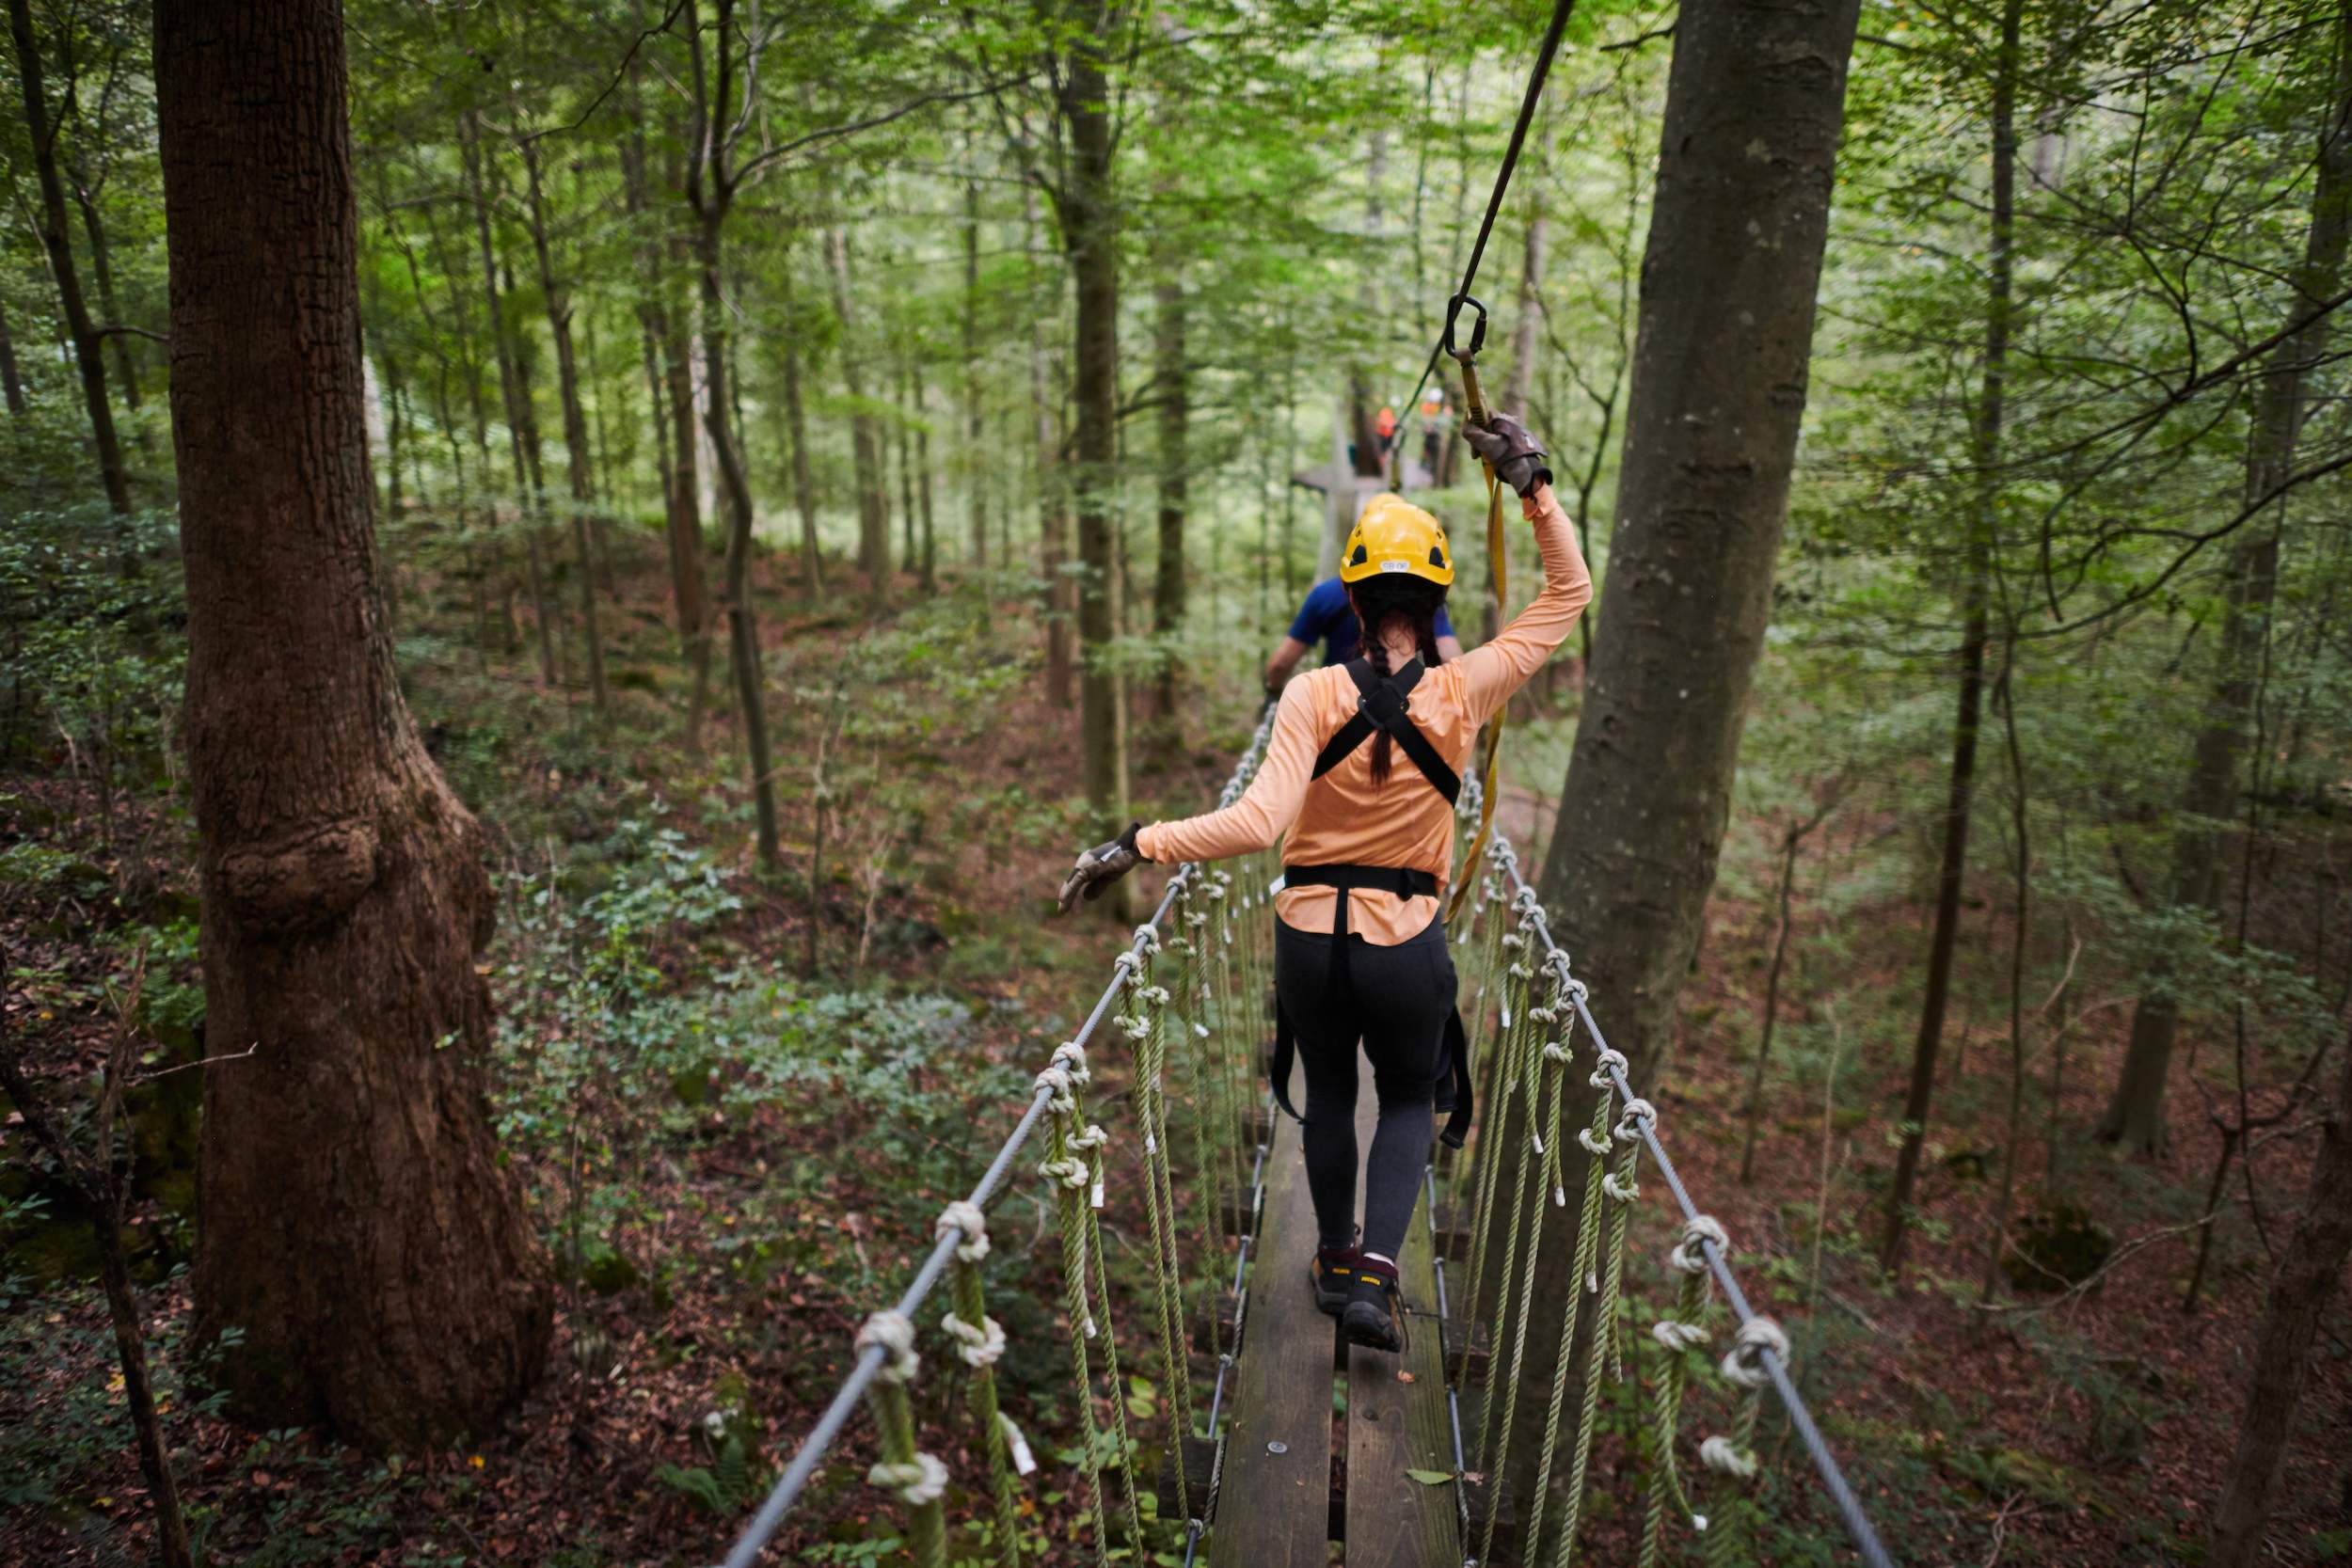 People on a bridge crossing the forests with harnesses and safety helmets at Canopy Tours.